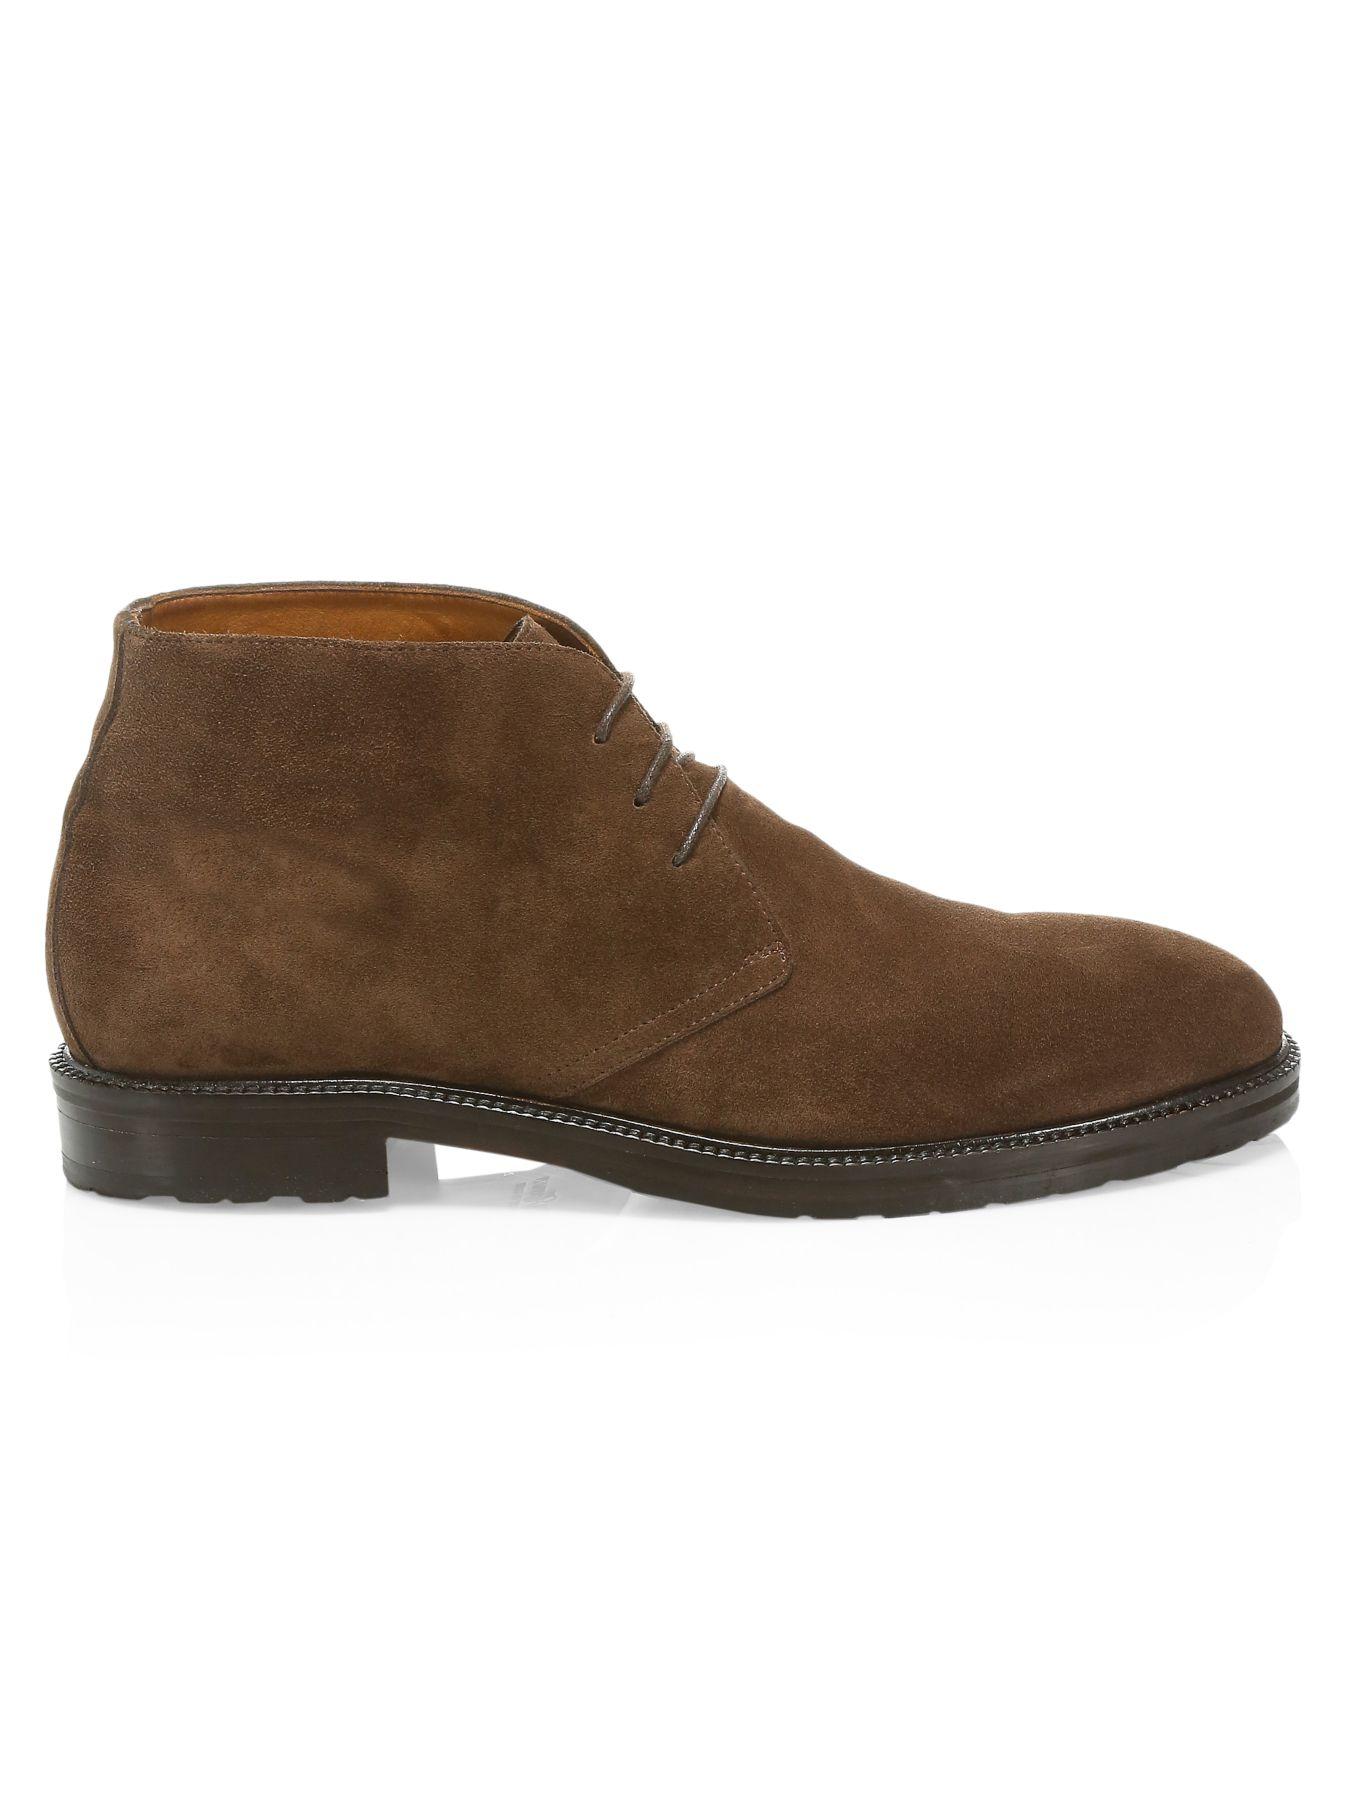 Saks Fifth Avenue Collection Suede Chukka Boots in Brown for Men - Lyst